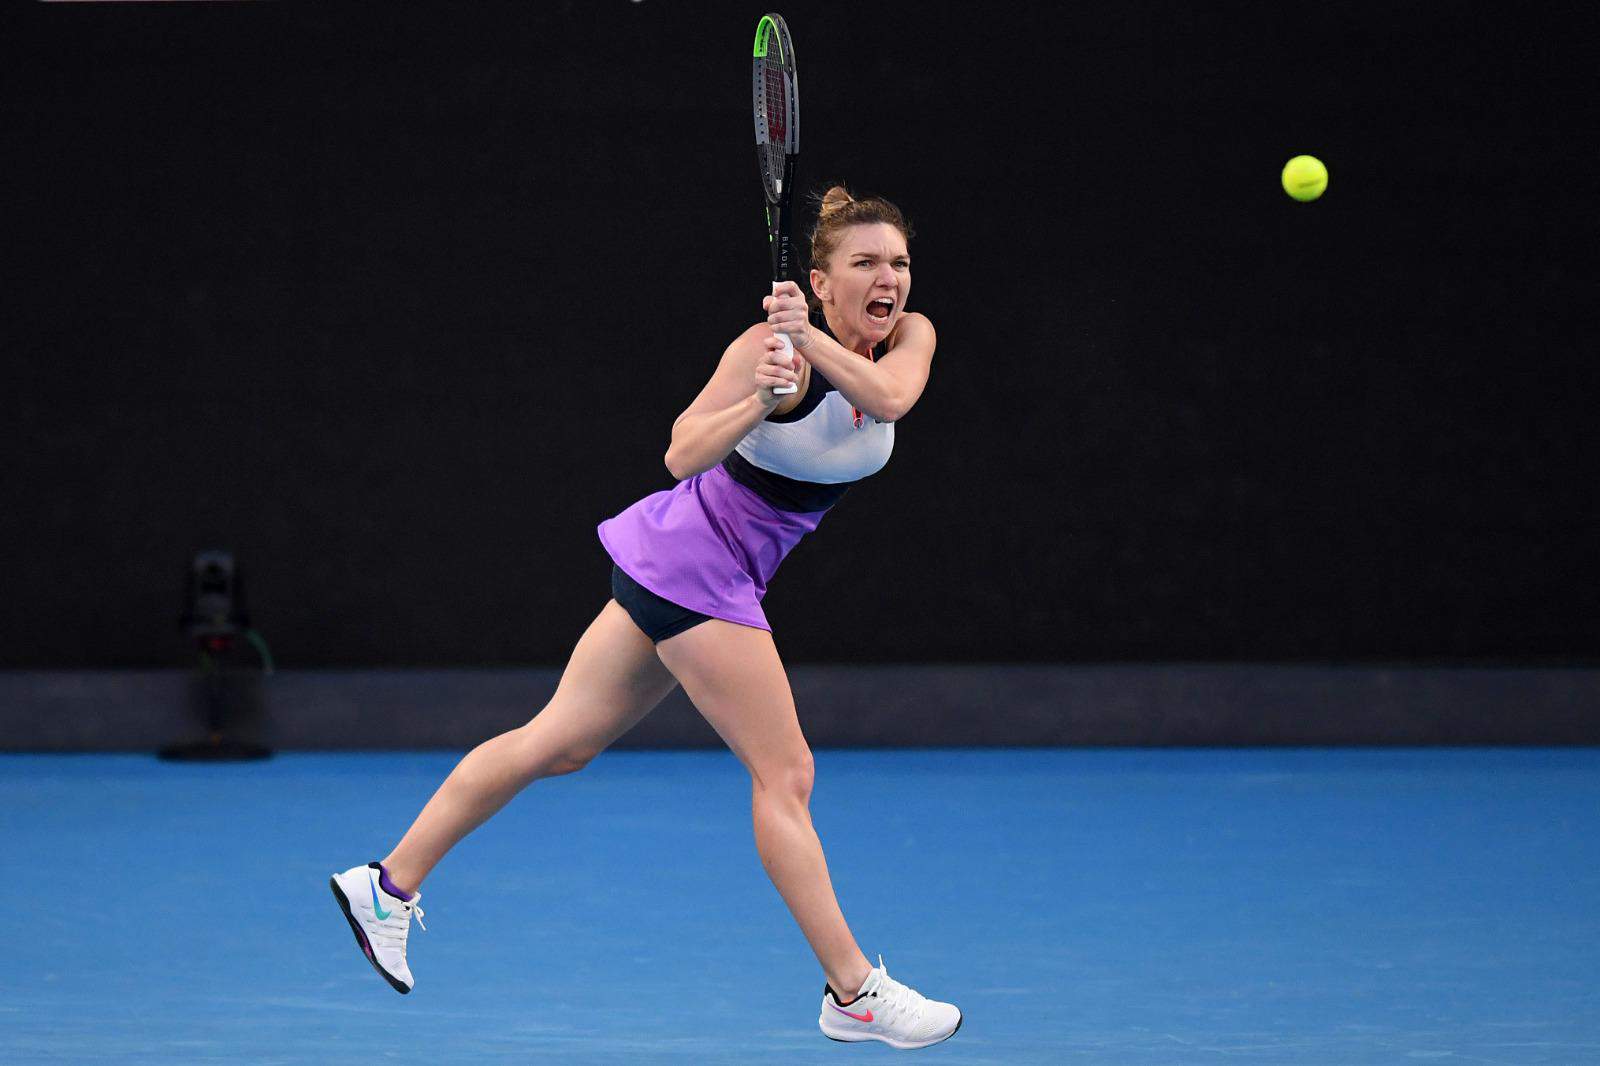 Under siege at the hands of Iga Swiatek, Simona Halep adjusted, then thrived, wresting control of her clash with the Polish star to move into the Australian Open quarterfinals